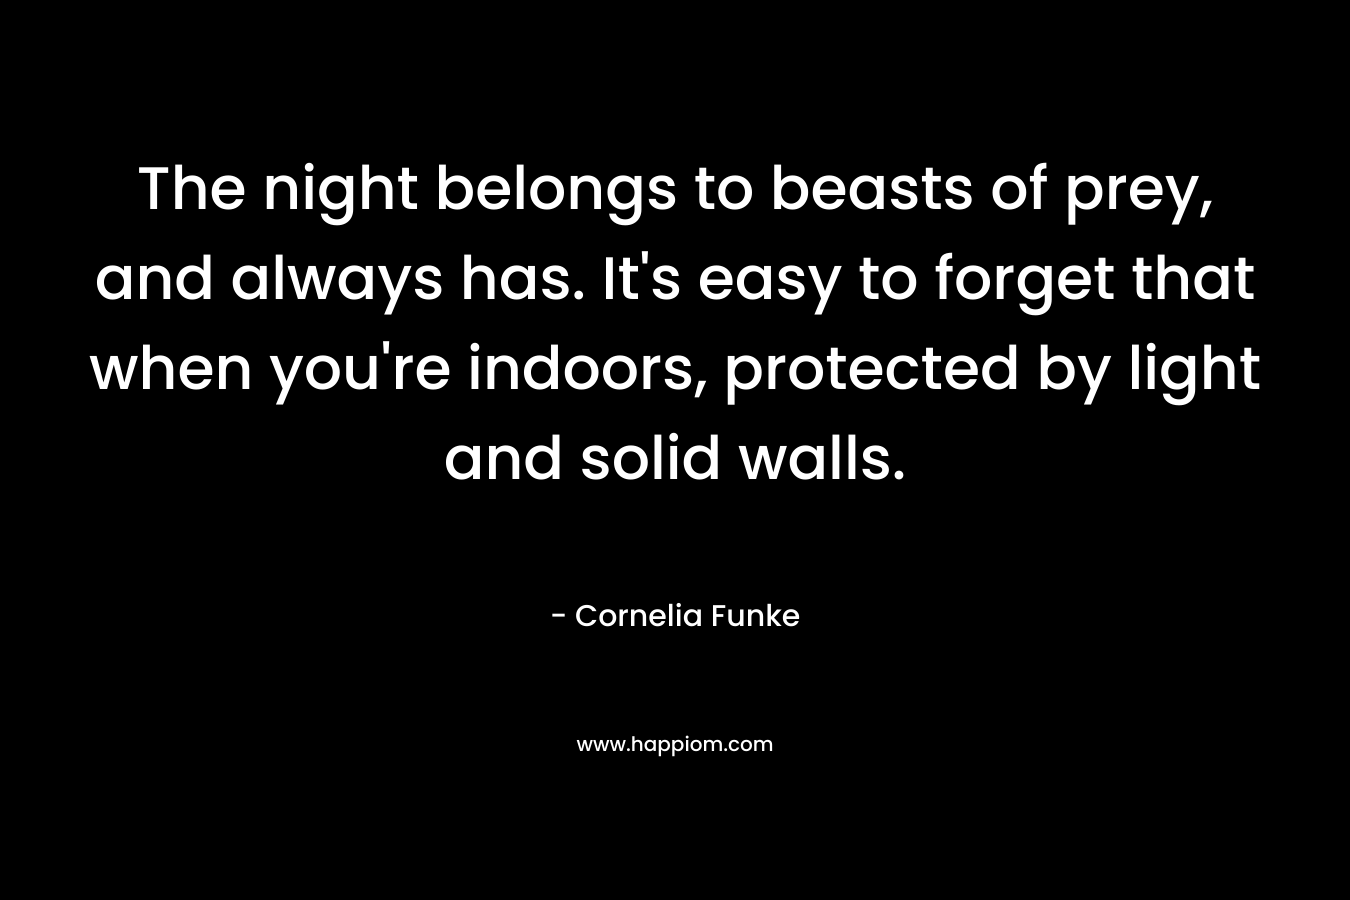 The night belongs to beasts of prey, and always has. It’s easy to forget that when you’re indoors, protected by light and solid walls. – Cornelia Funke